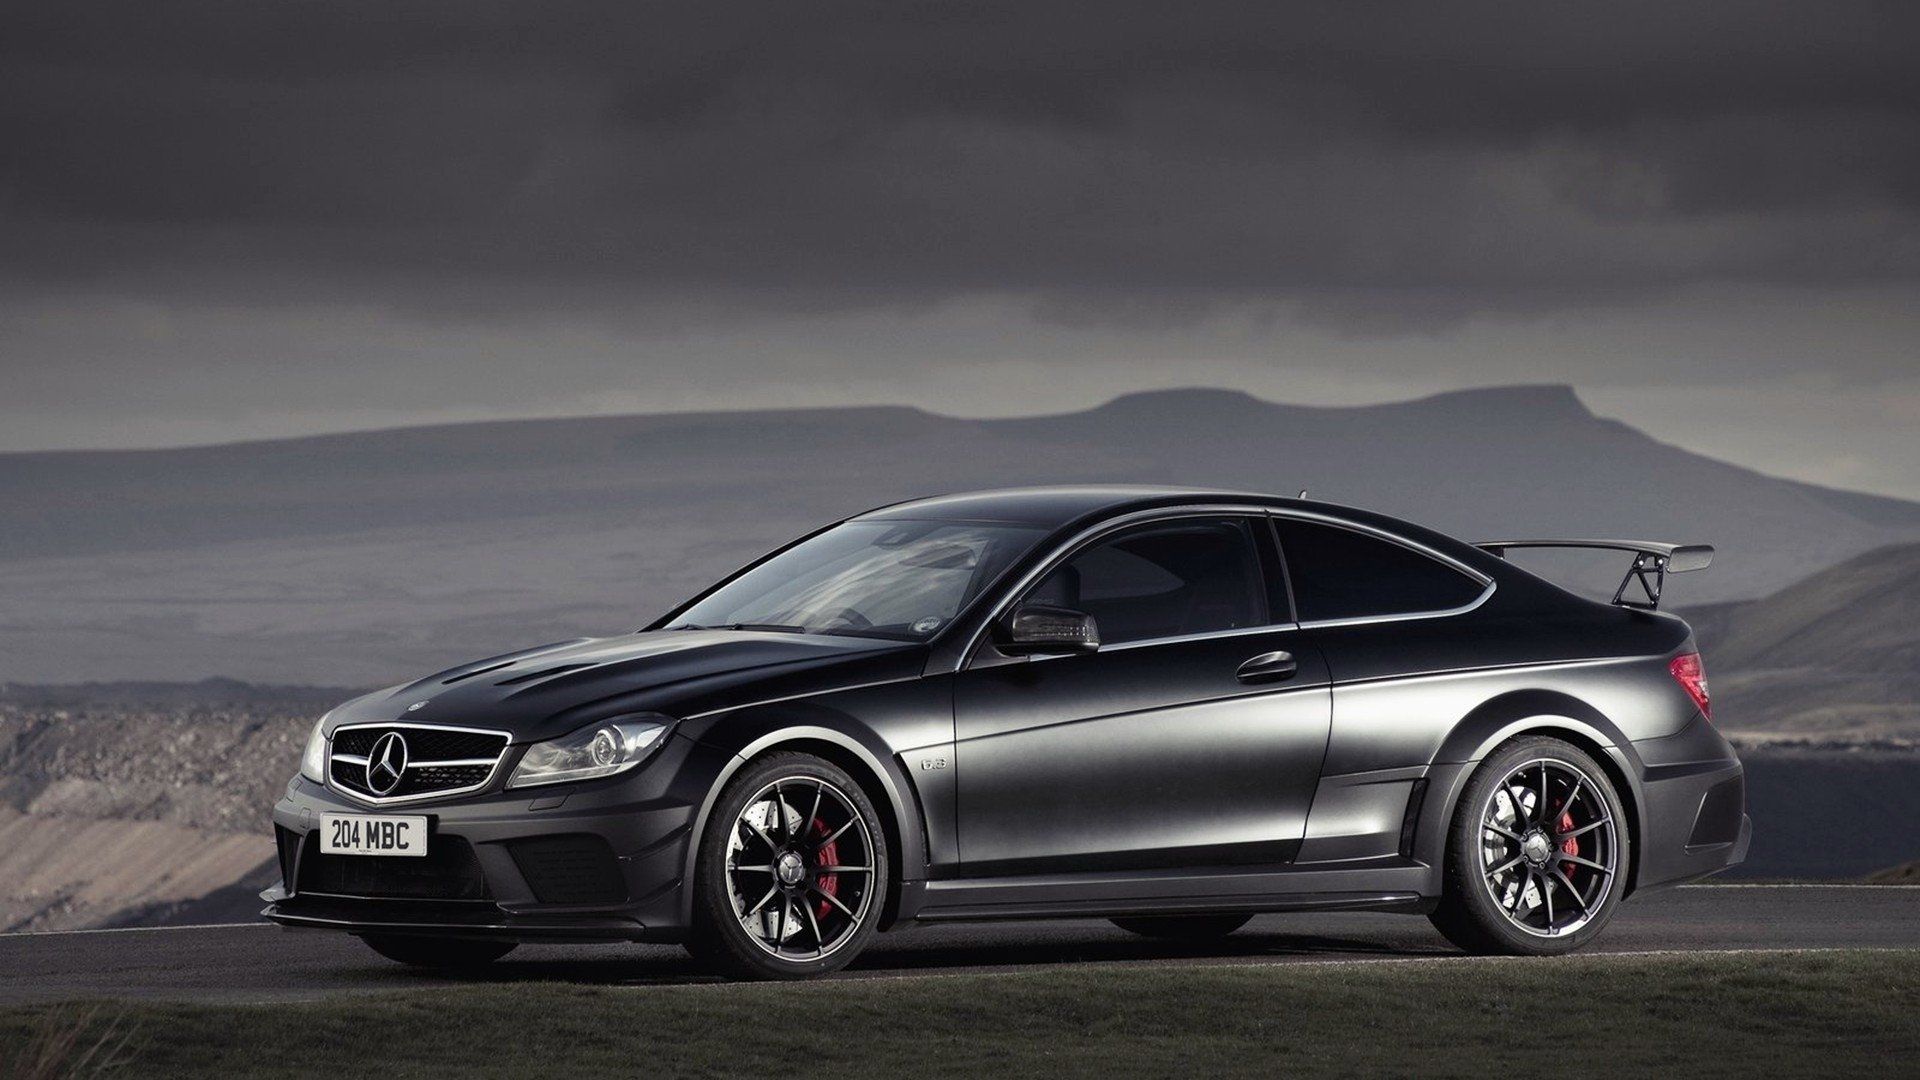 Mercedes Benz C63 AMG HD Wallpaper And Background Image